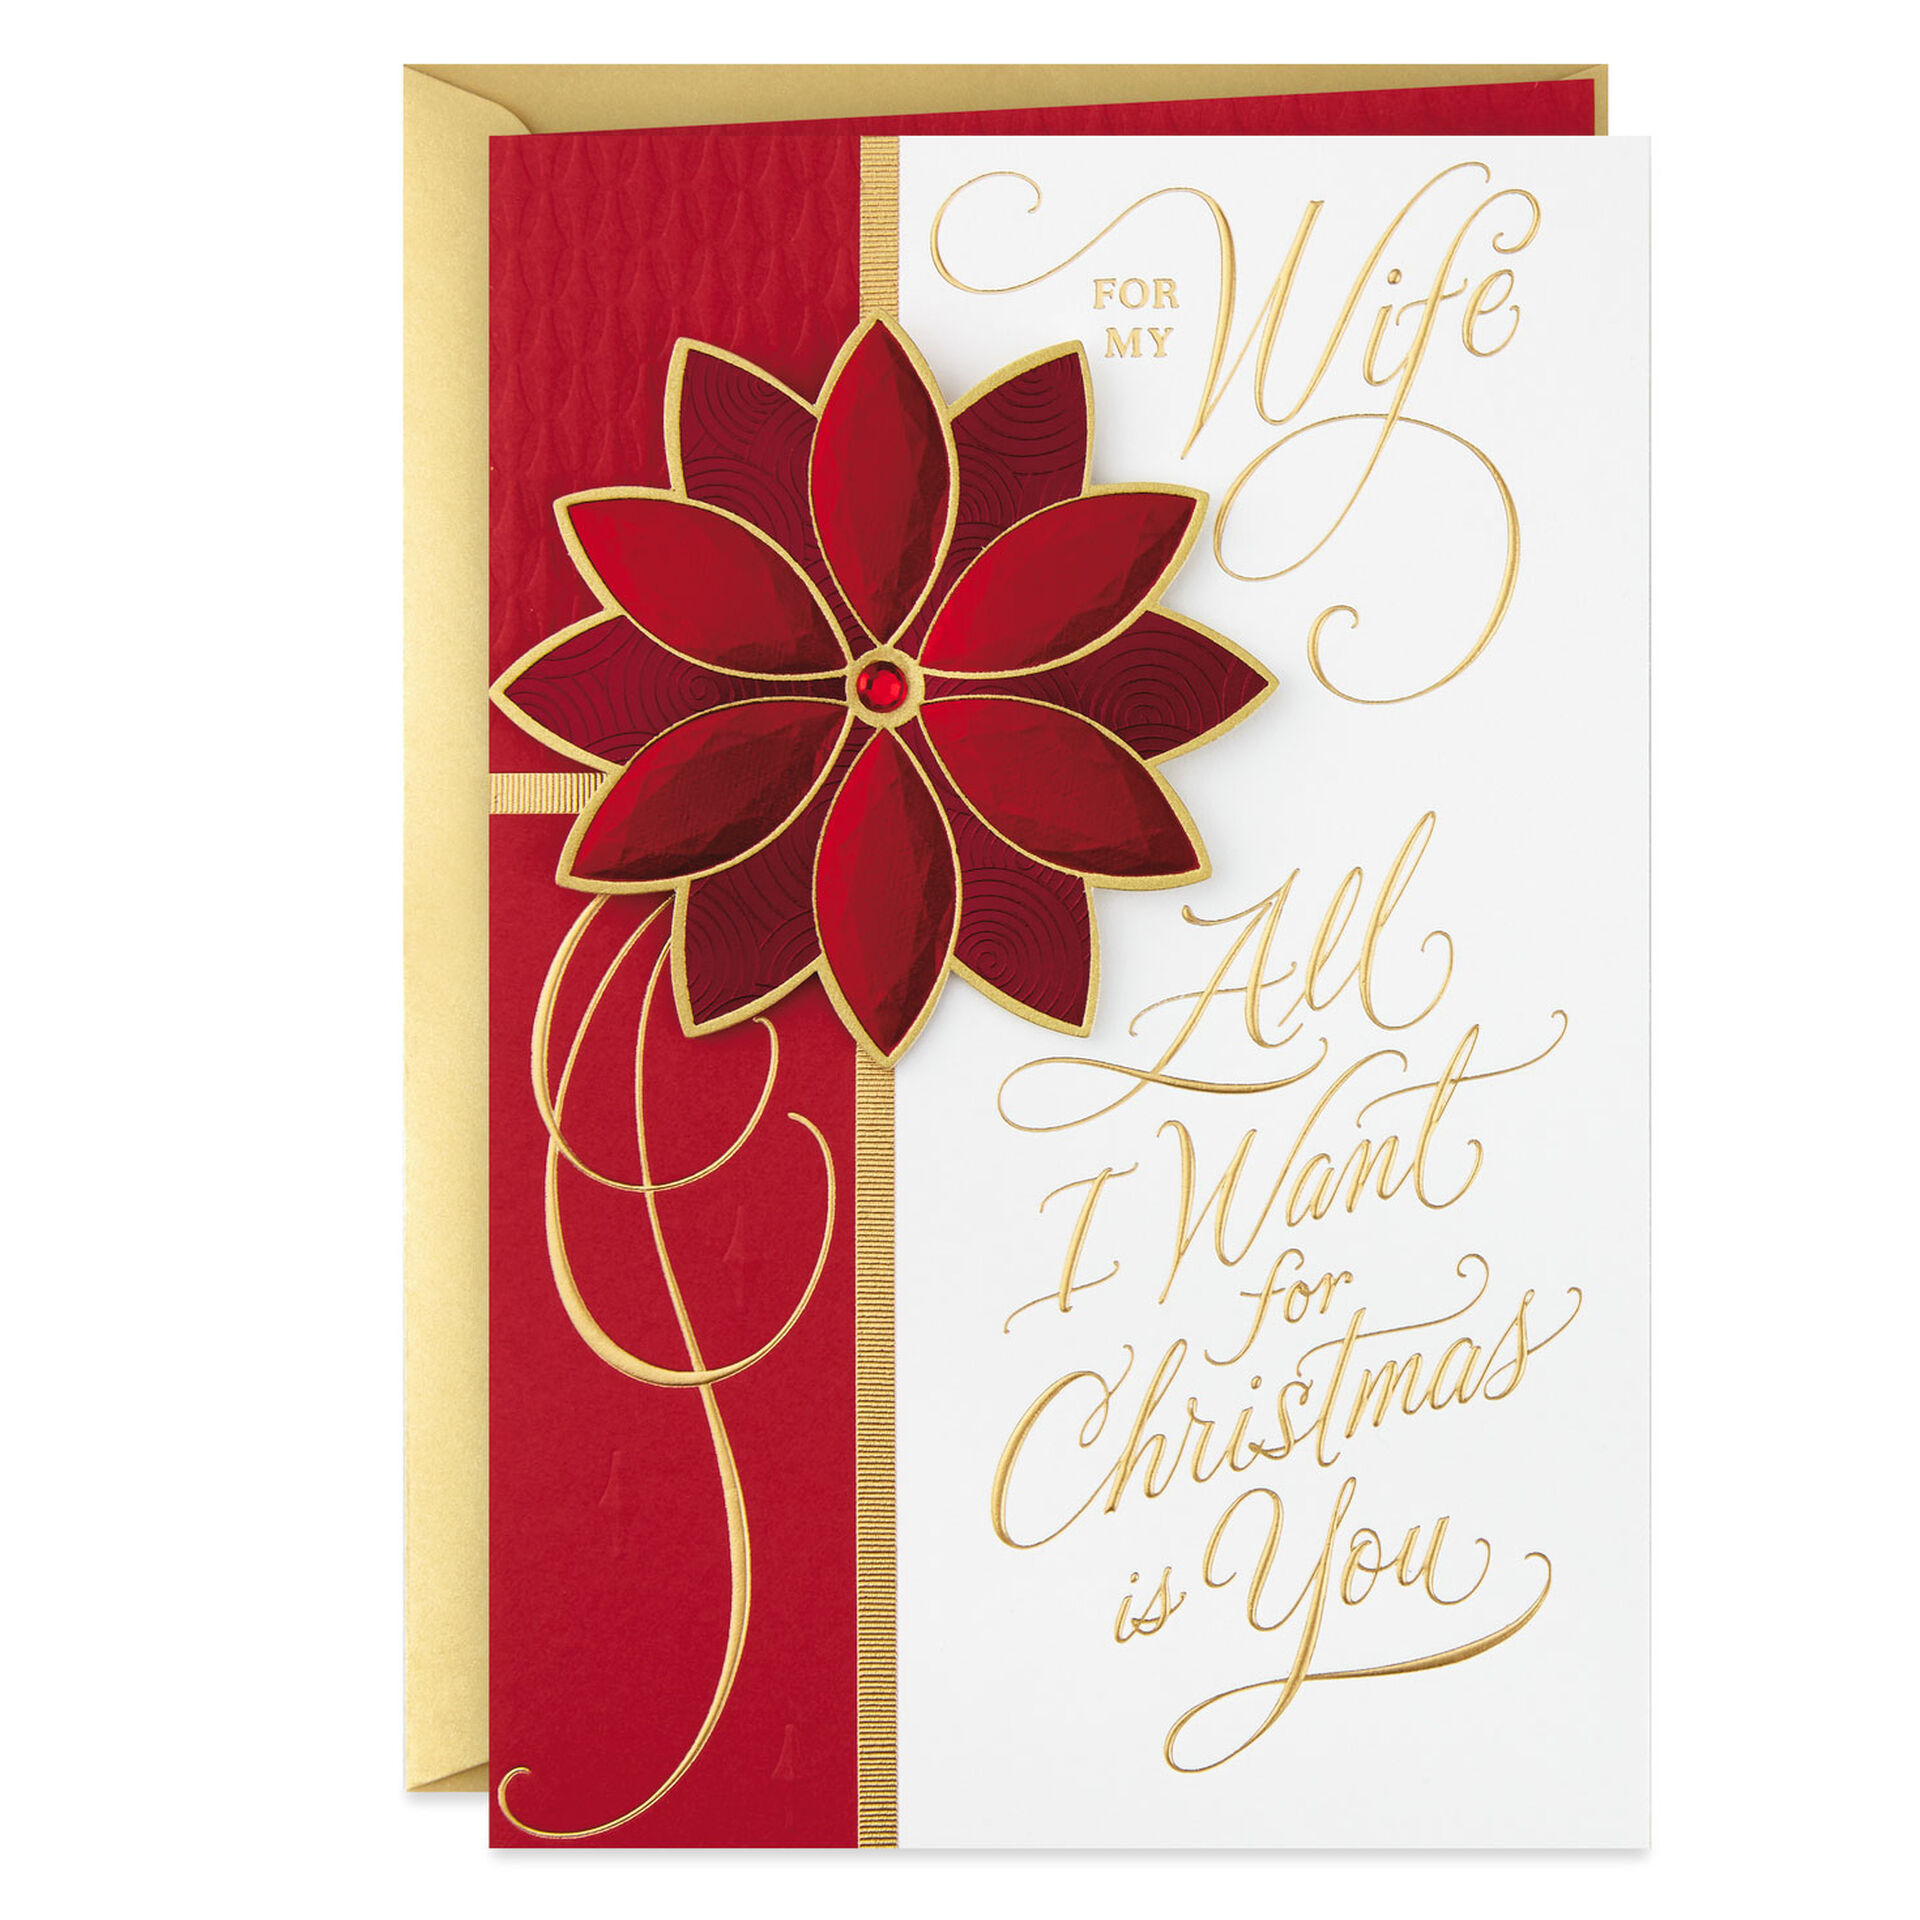 All I Want Is You Christmas Card for Wife - Greeting Cards - Hallmark